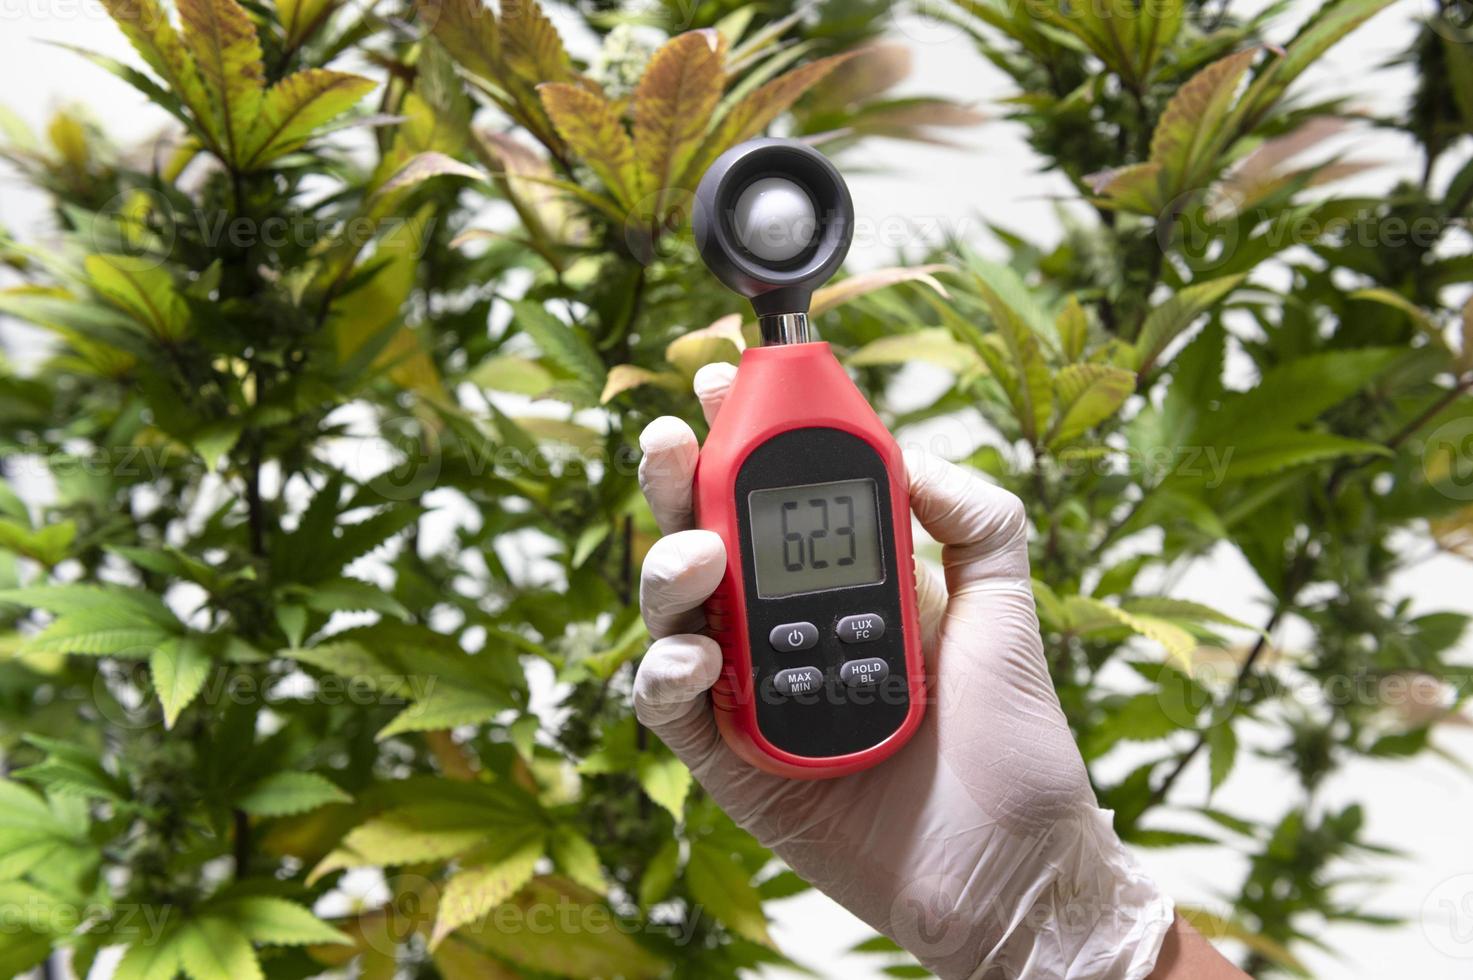 medical professional uses a thermometer and a hygrometer to show the temperature and humidity next to the cannabis plant. The humidity indicator is displayed on the device hygrometer. photo